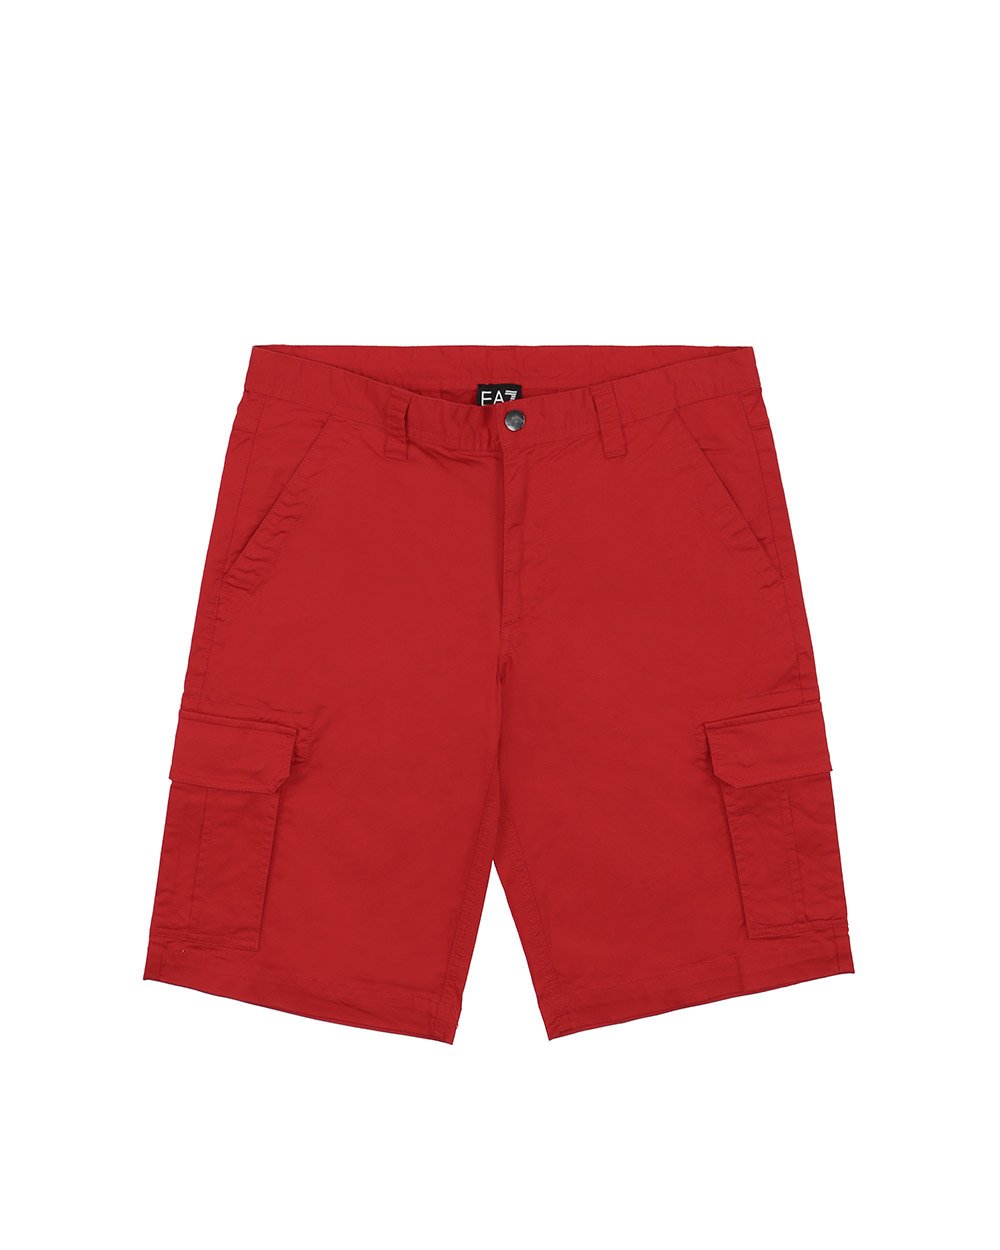 Cotton Shorts - ISSI Outlet